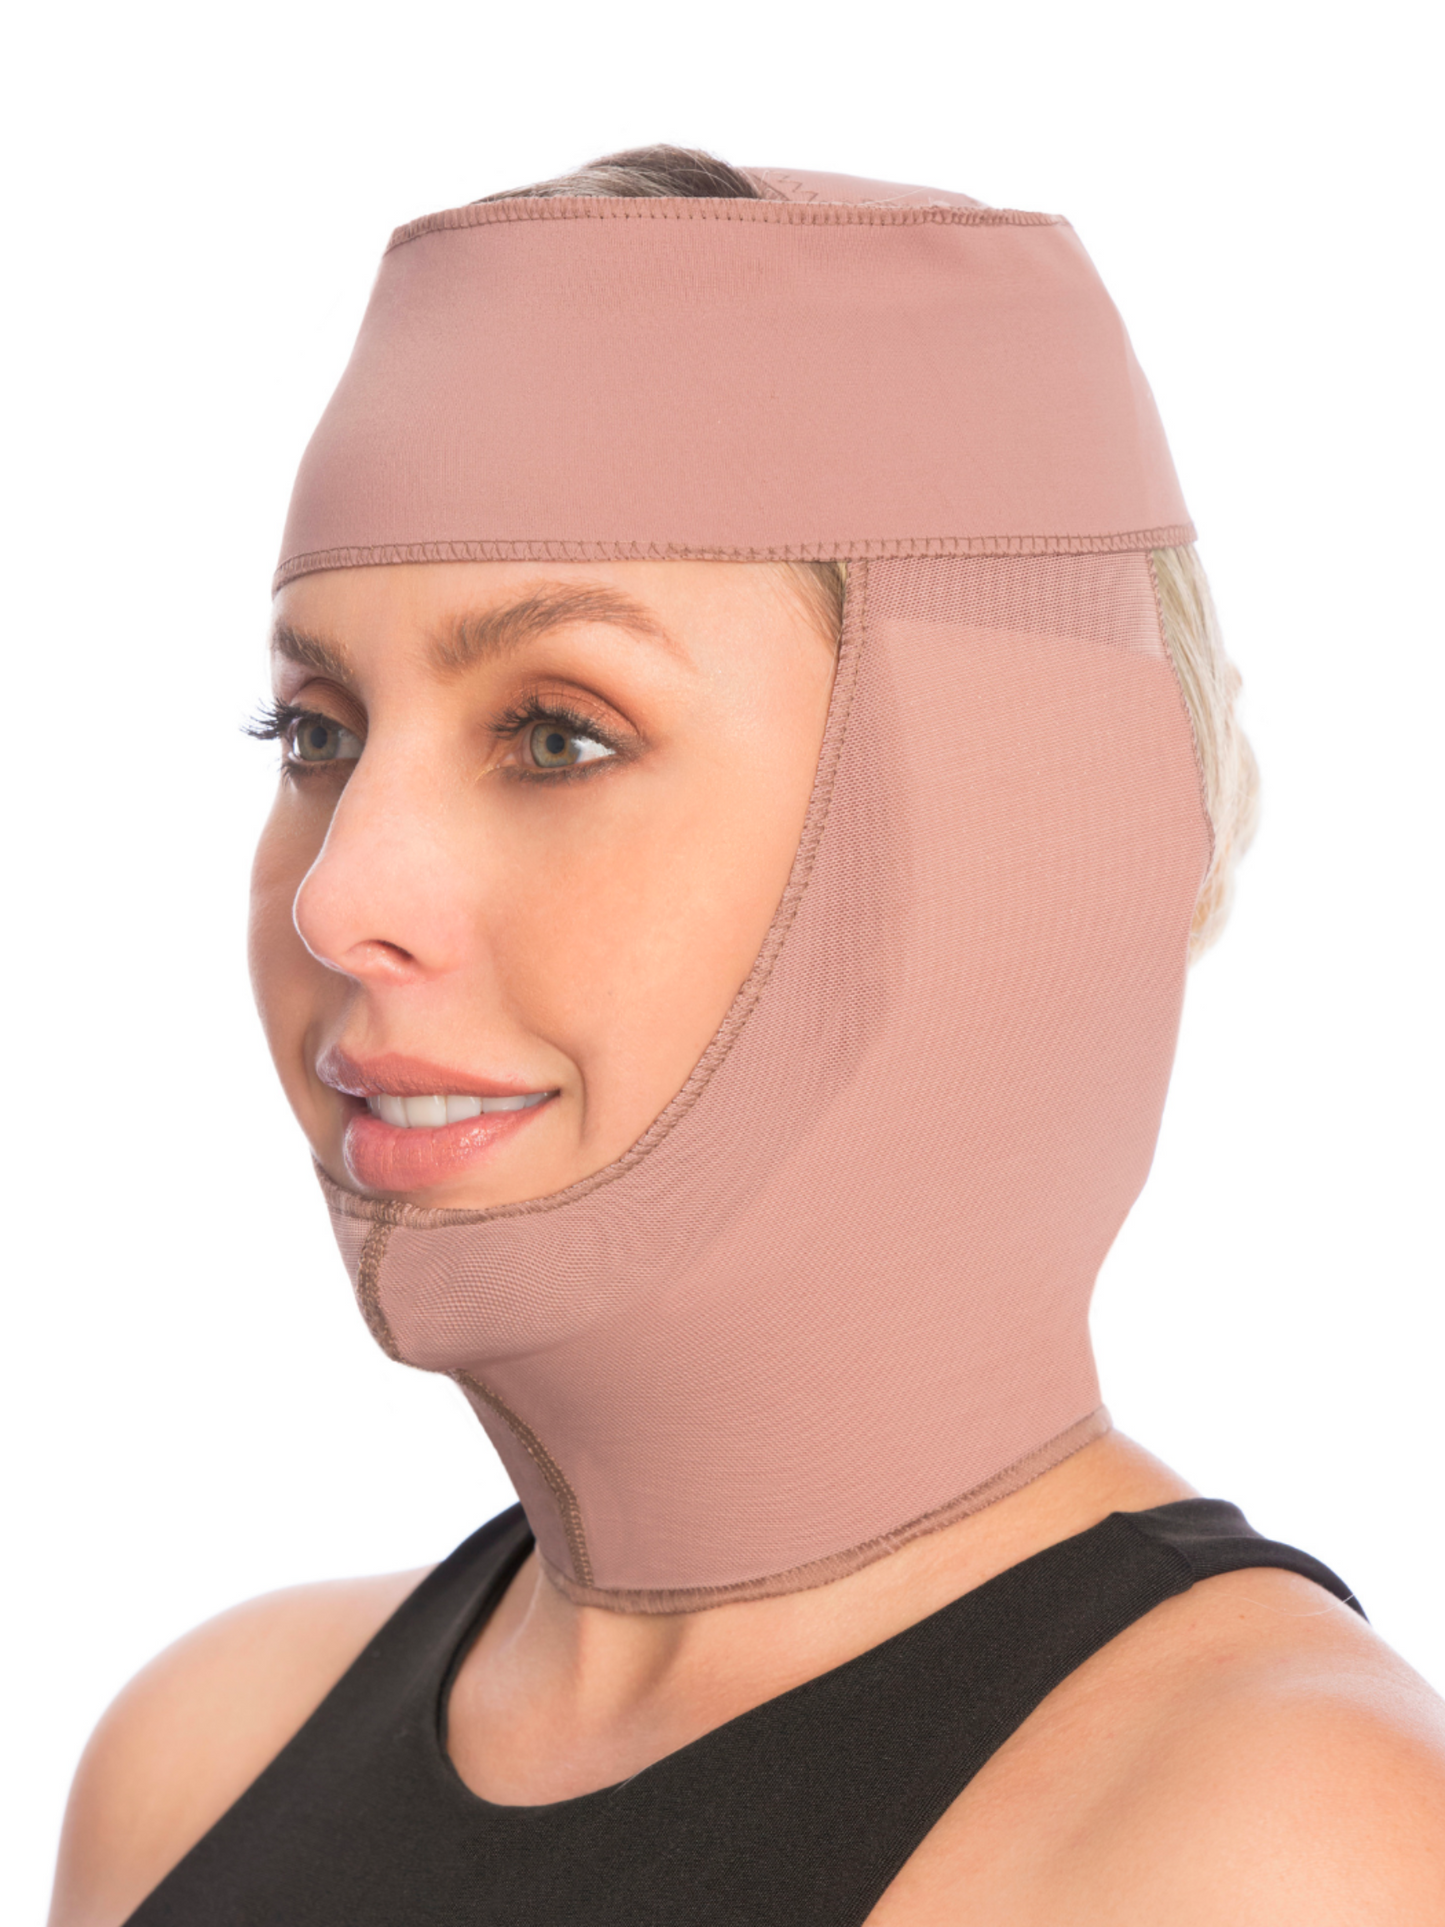 Post-Surgical Girdle for Chin, Neck, and Face: Ref: 09029